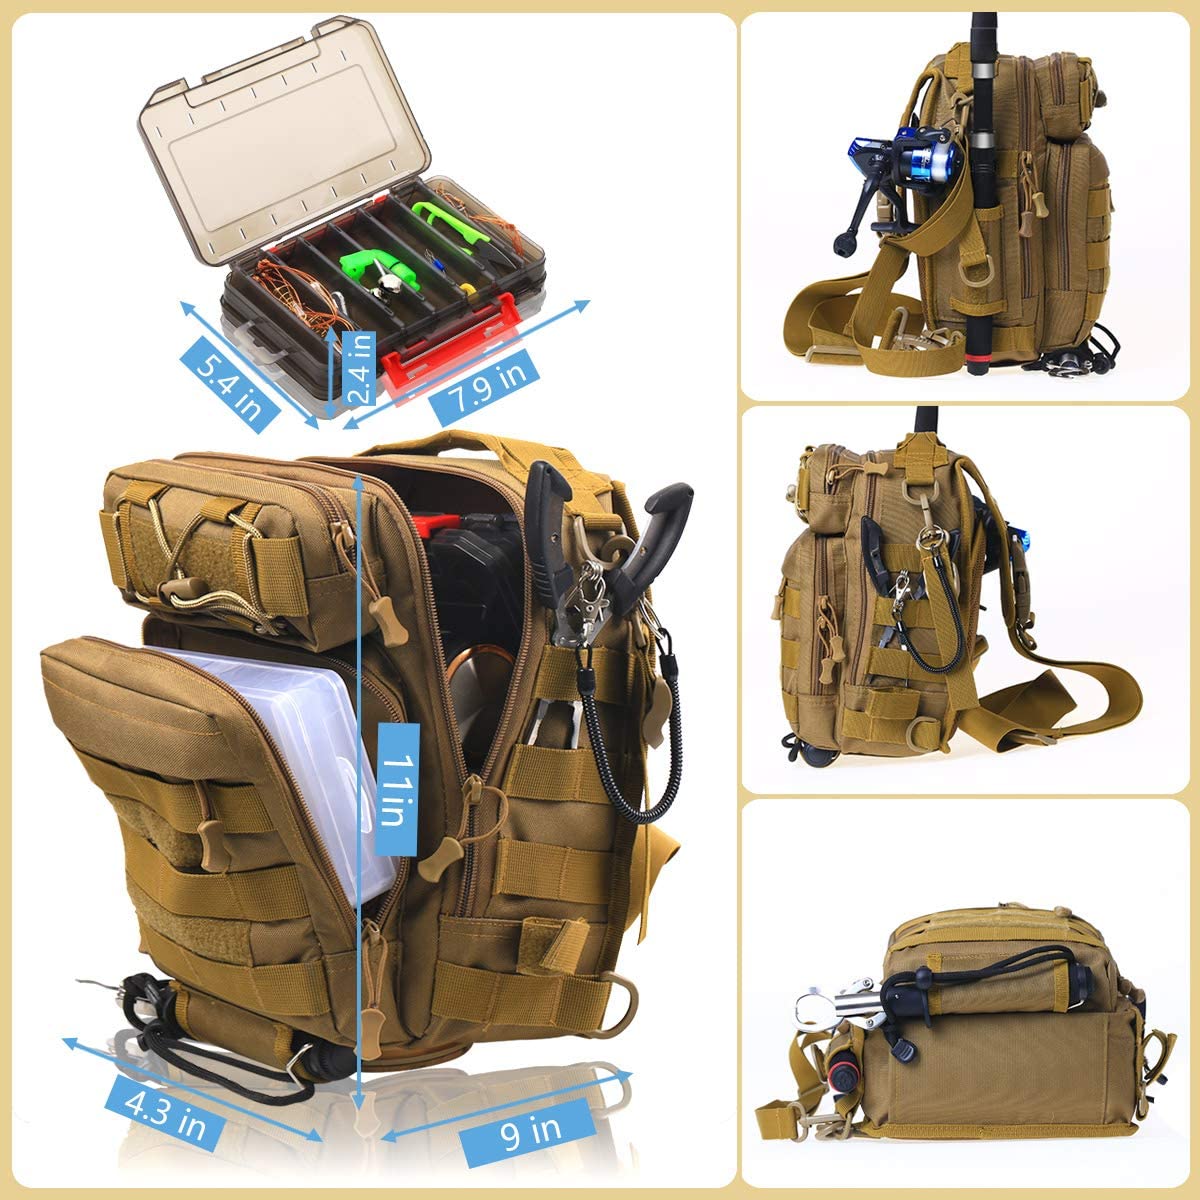 Aertiavty Compact Fishing Tackle Bag, Fishing Bag with Tackle Box and Rod Holder Outdoor Sport Fishing Backpack Khaki - image 2 of 8